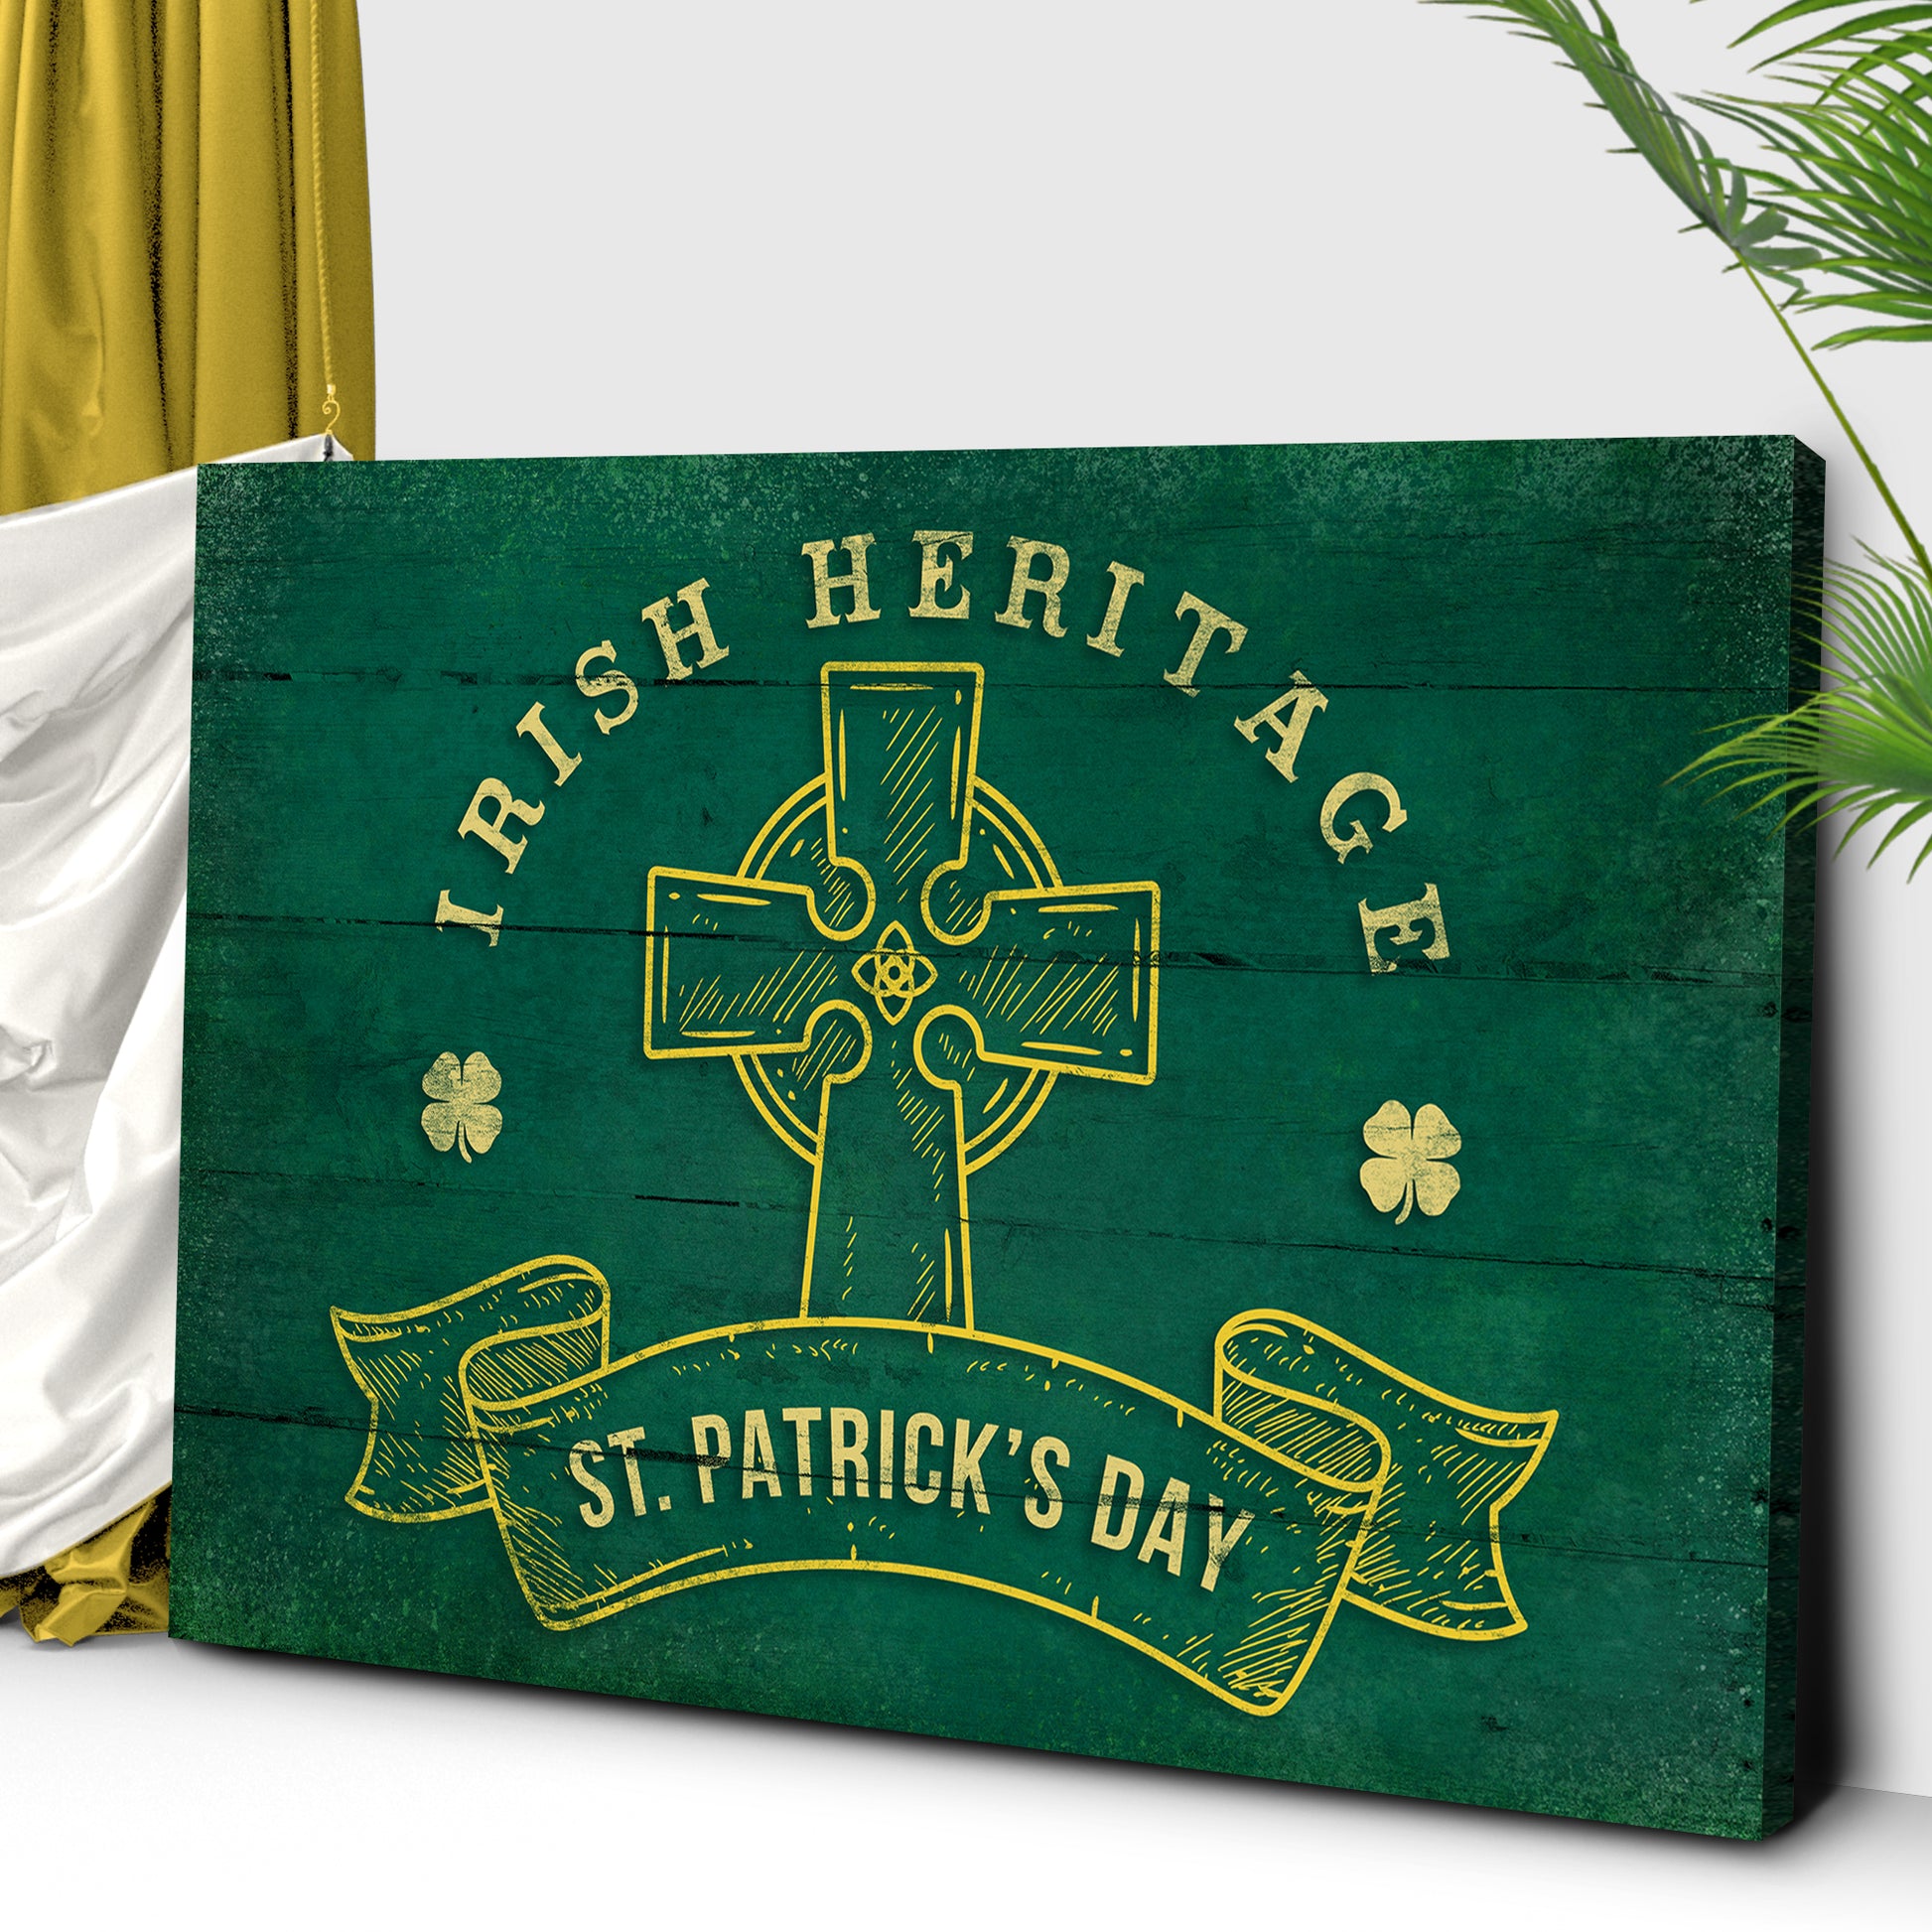 Irish Heritage Sign  Style 2 - Image by Tailored Canvases